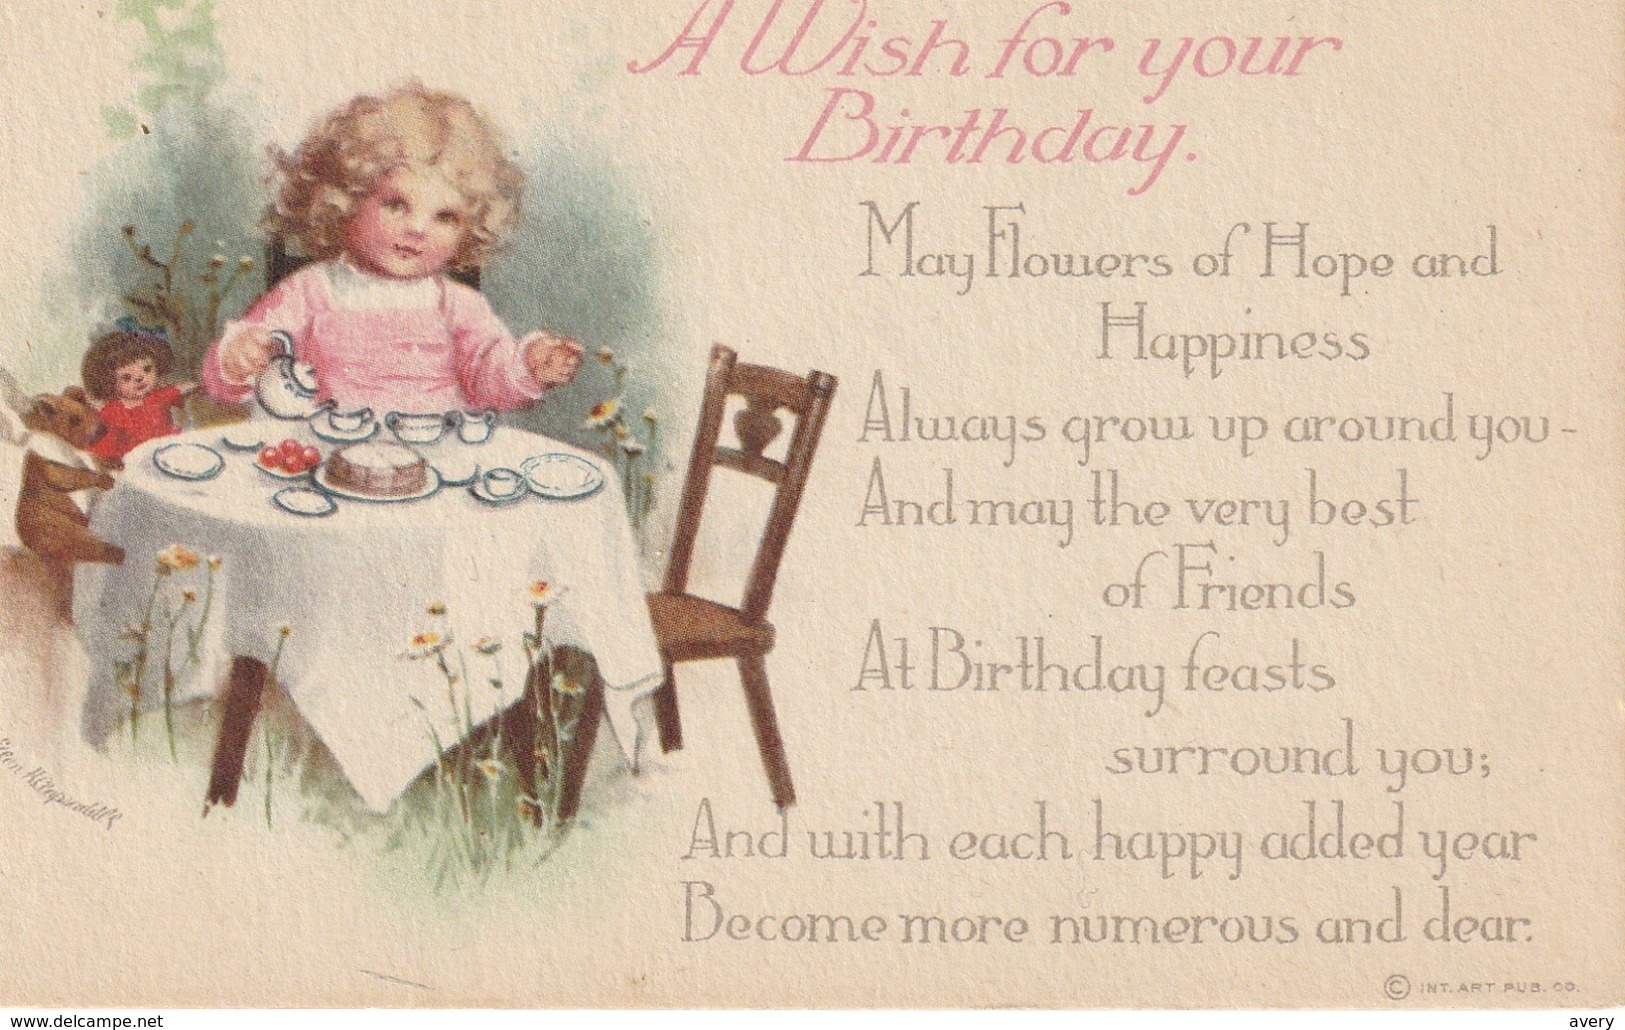 A Wish For Your Birthday May Flowers Of Hope And Happiness   Aways Grow Up Around You  And May .  .  .  .  . - Birthday